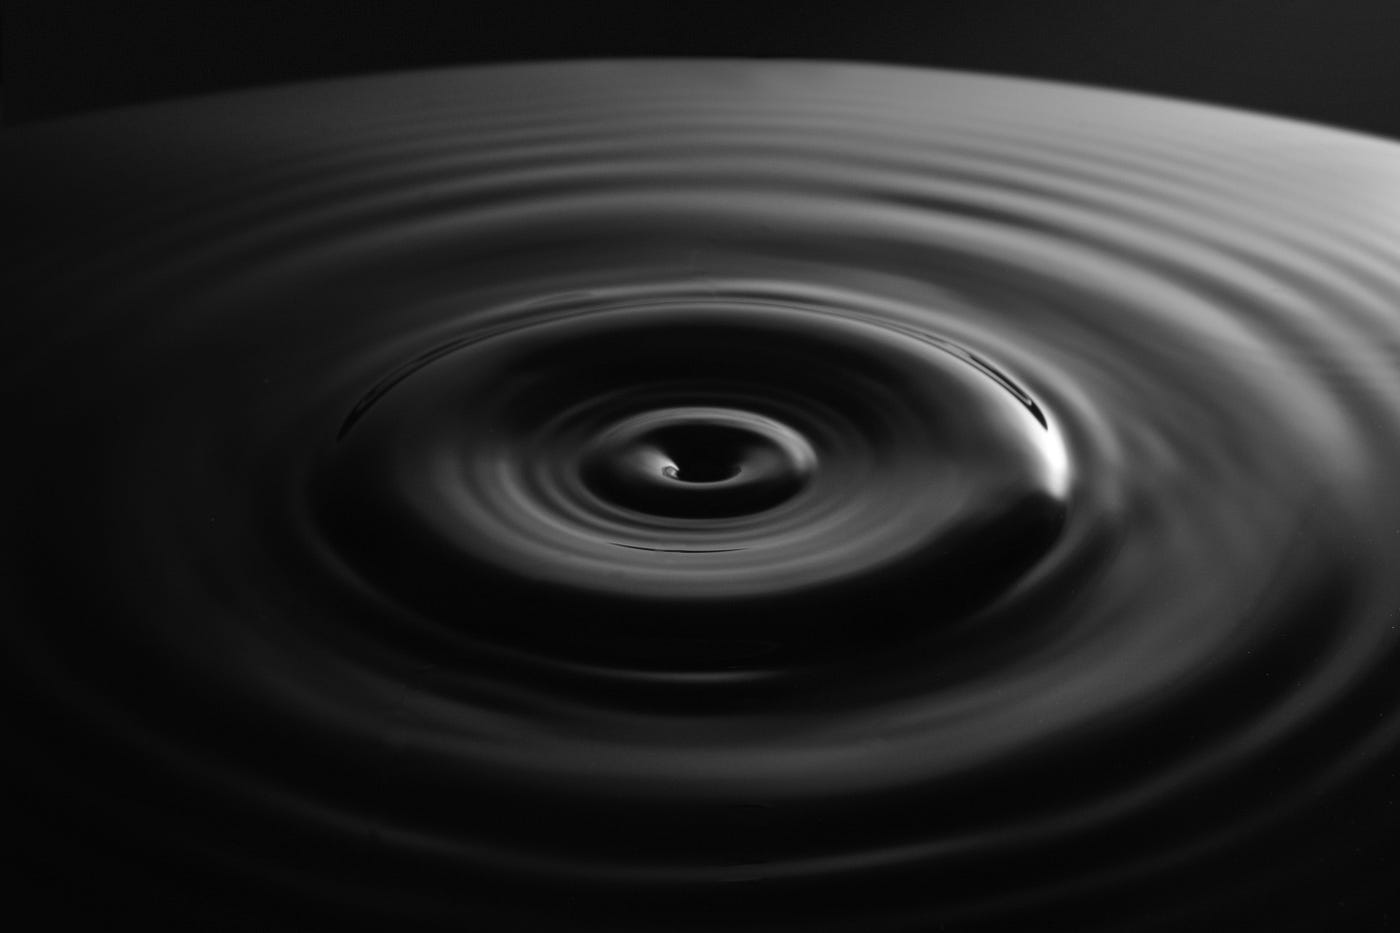 HOW TO: create the ripple effect from Material Design